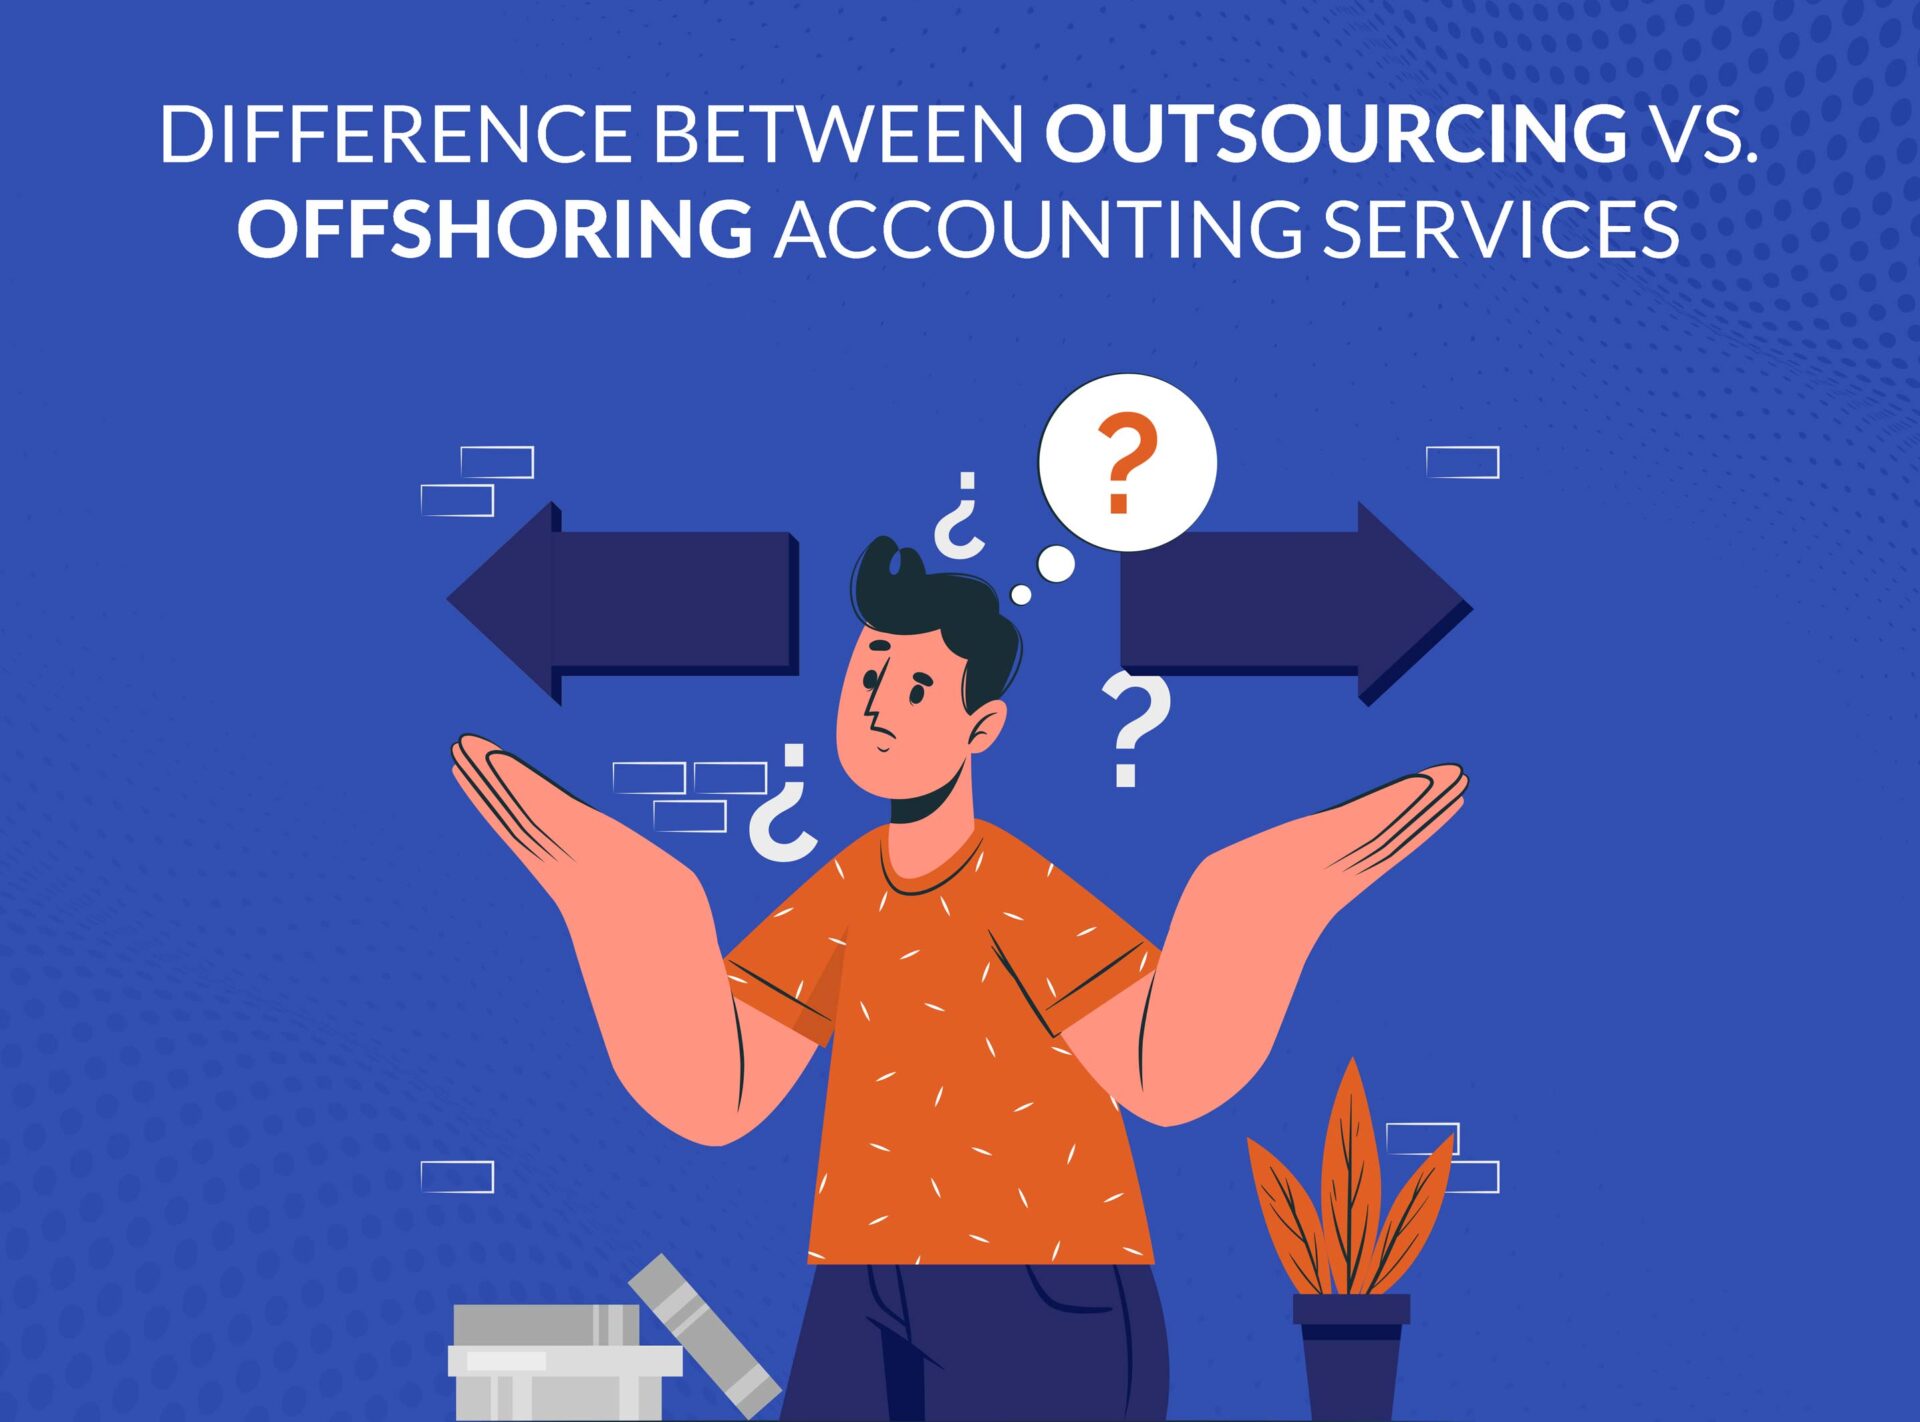 Outsourcing vs Offshoring Accounting Services